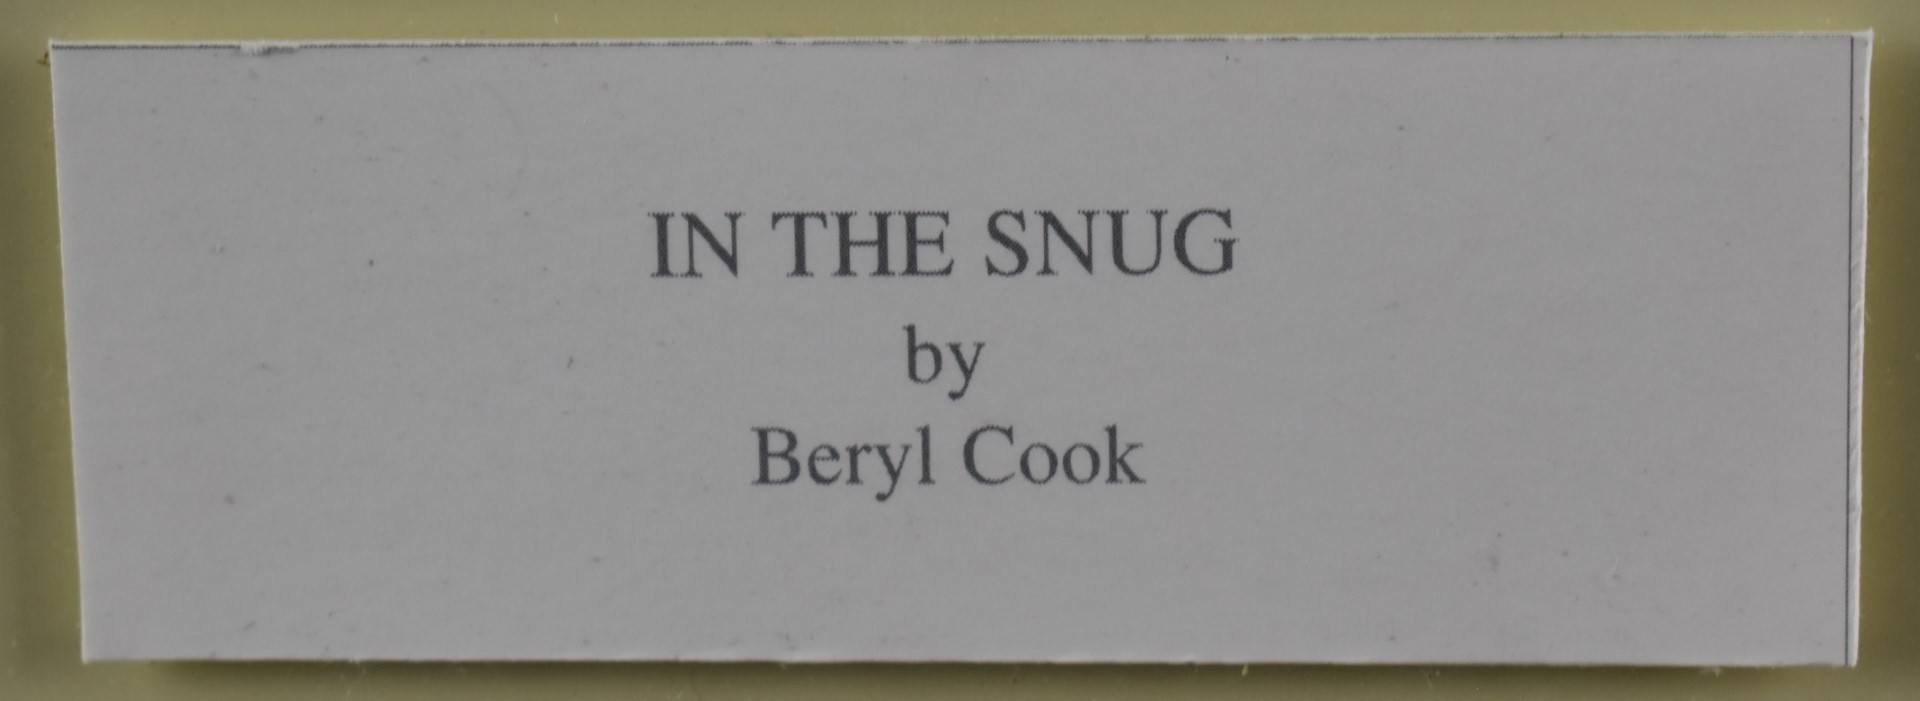 Beryl Cook signed print In The Snug, 46 x 46cm, in modern frame - Image 6 of 7